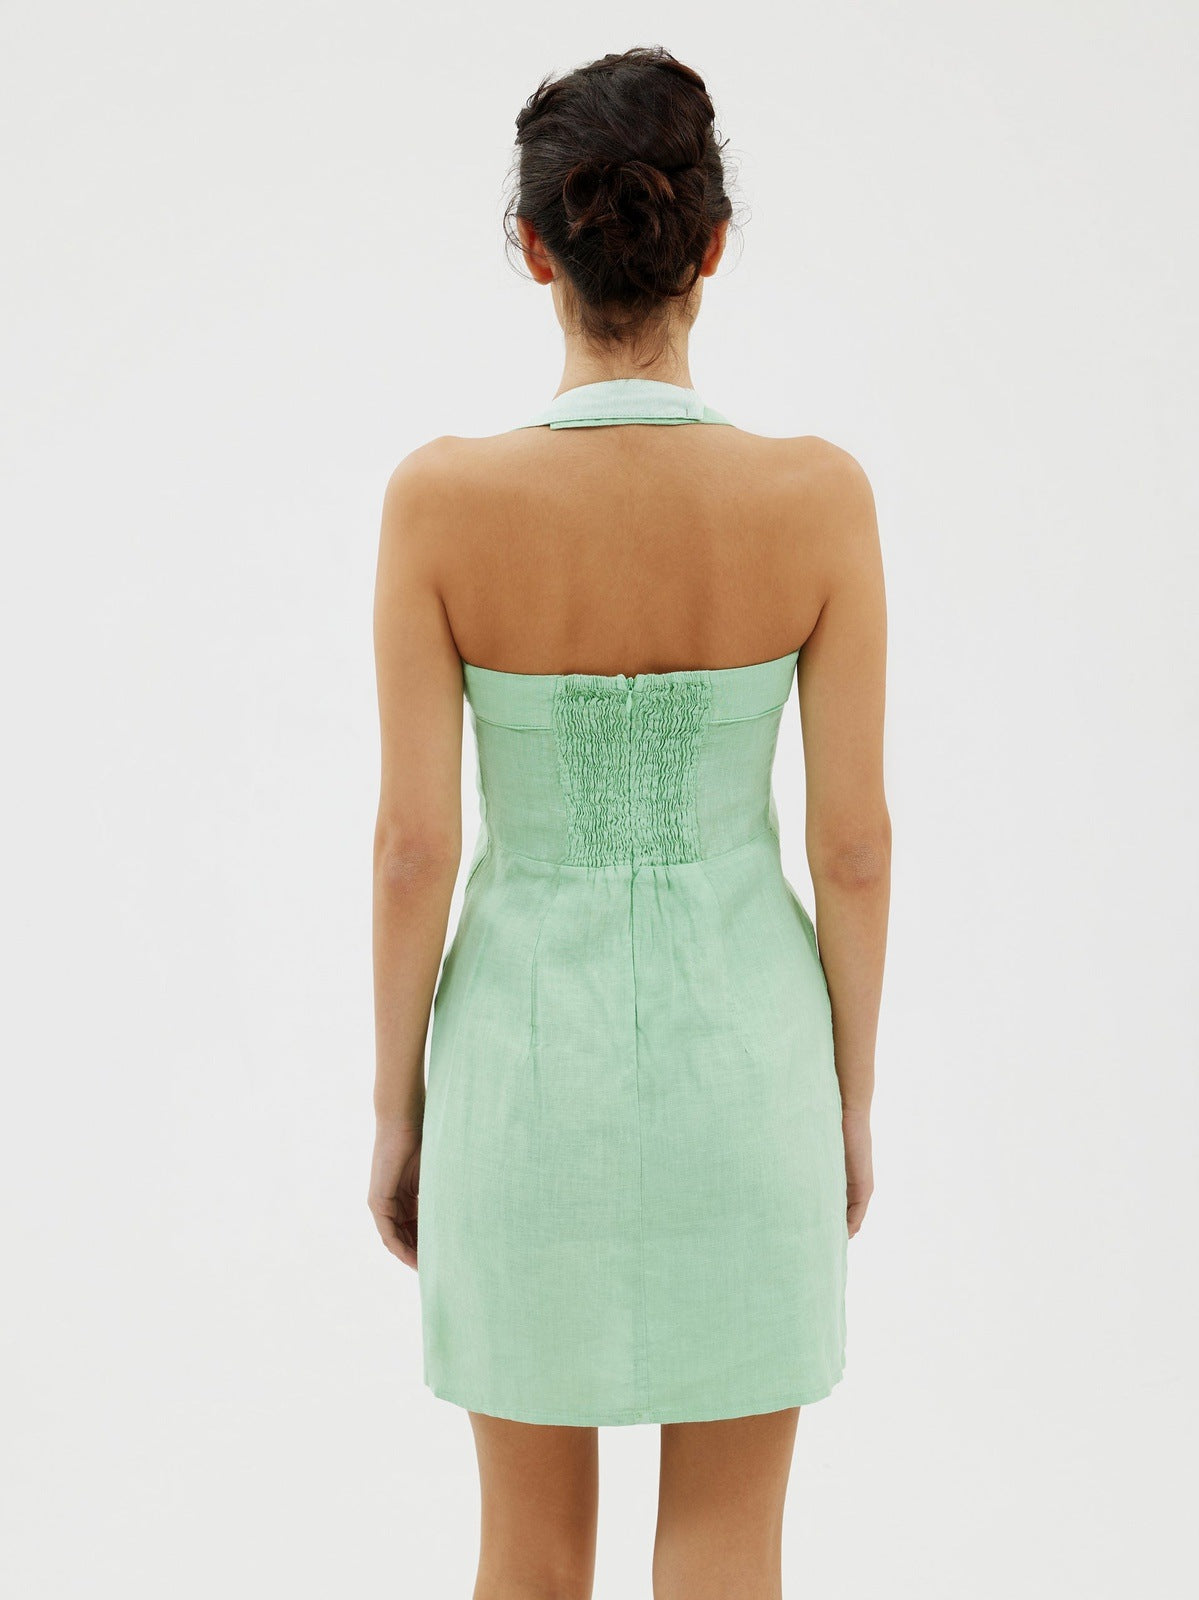 The Katie dress in Matcha